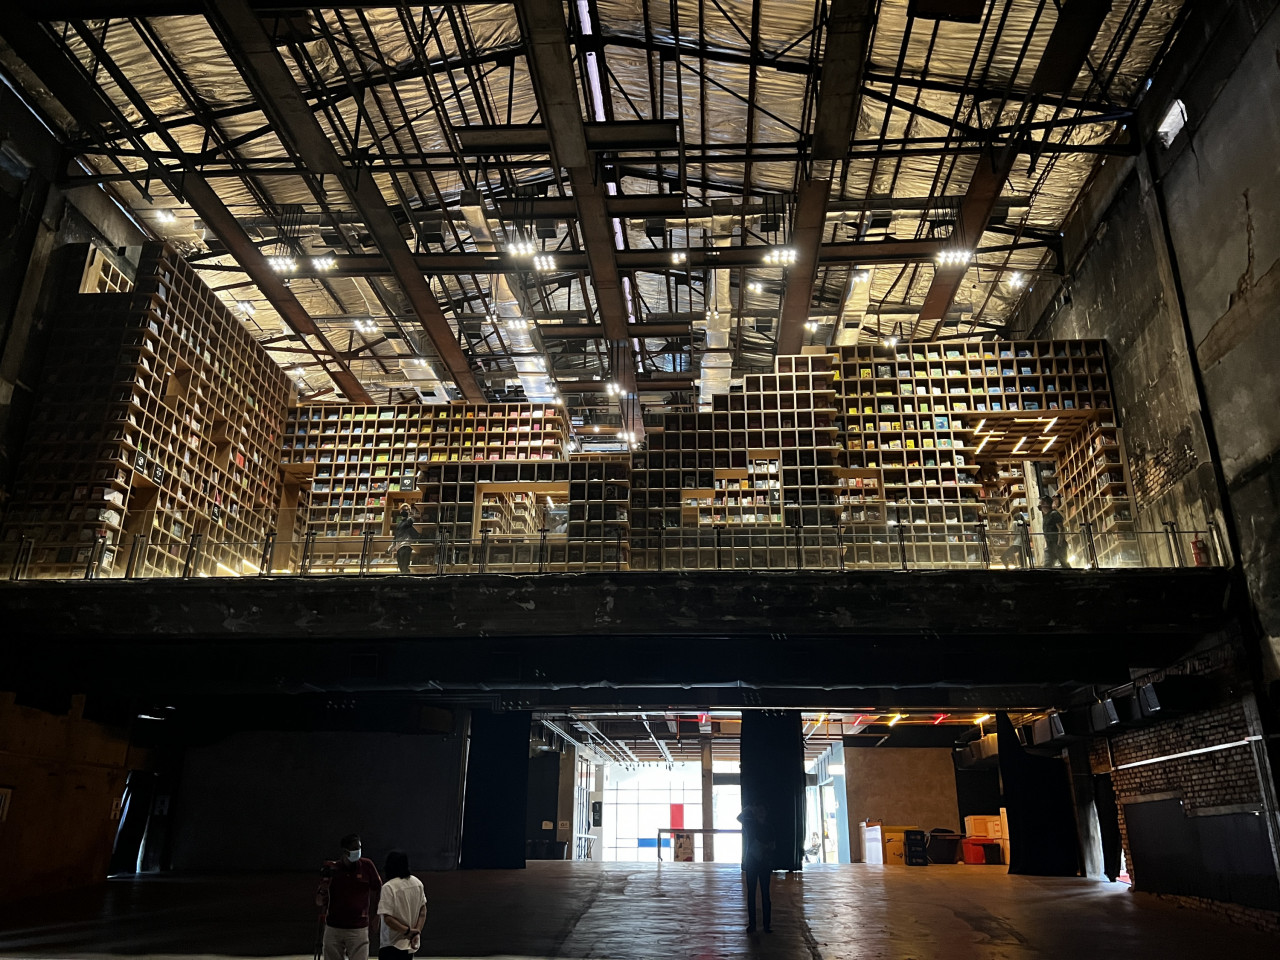 A look back at the bookstore from the exhibition space. The scale of the location is quite something. – Haikal Fernandez pic